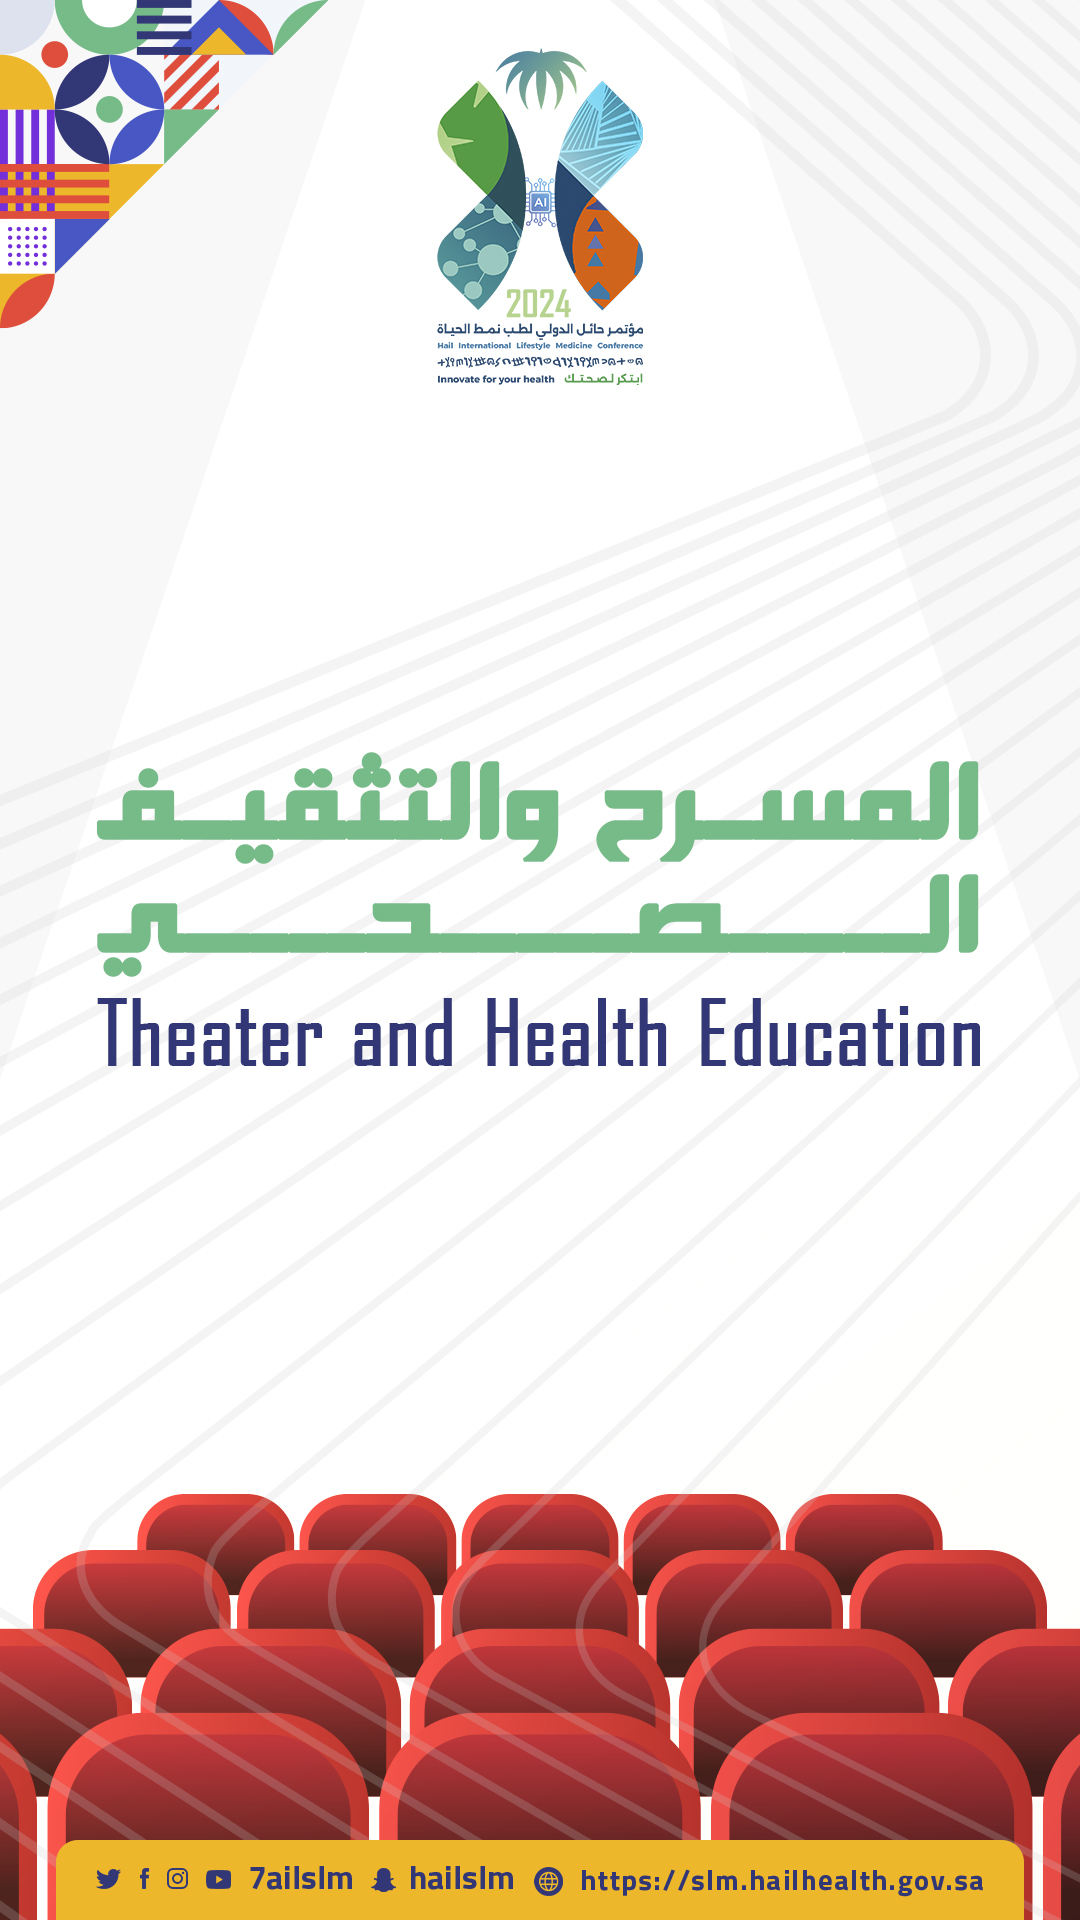 Theater and health education